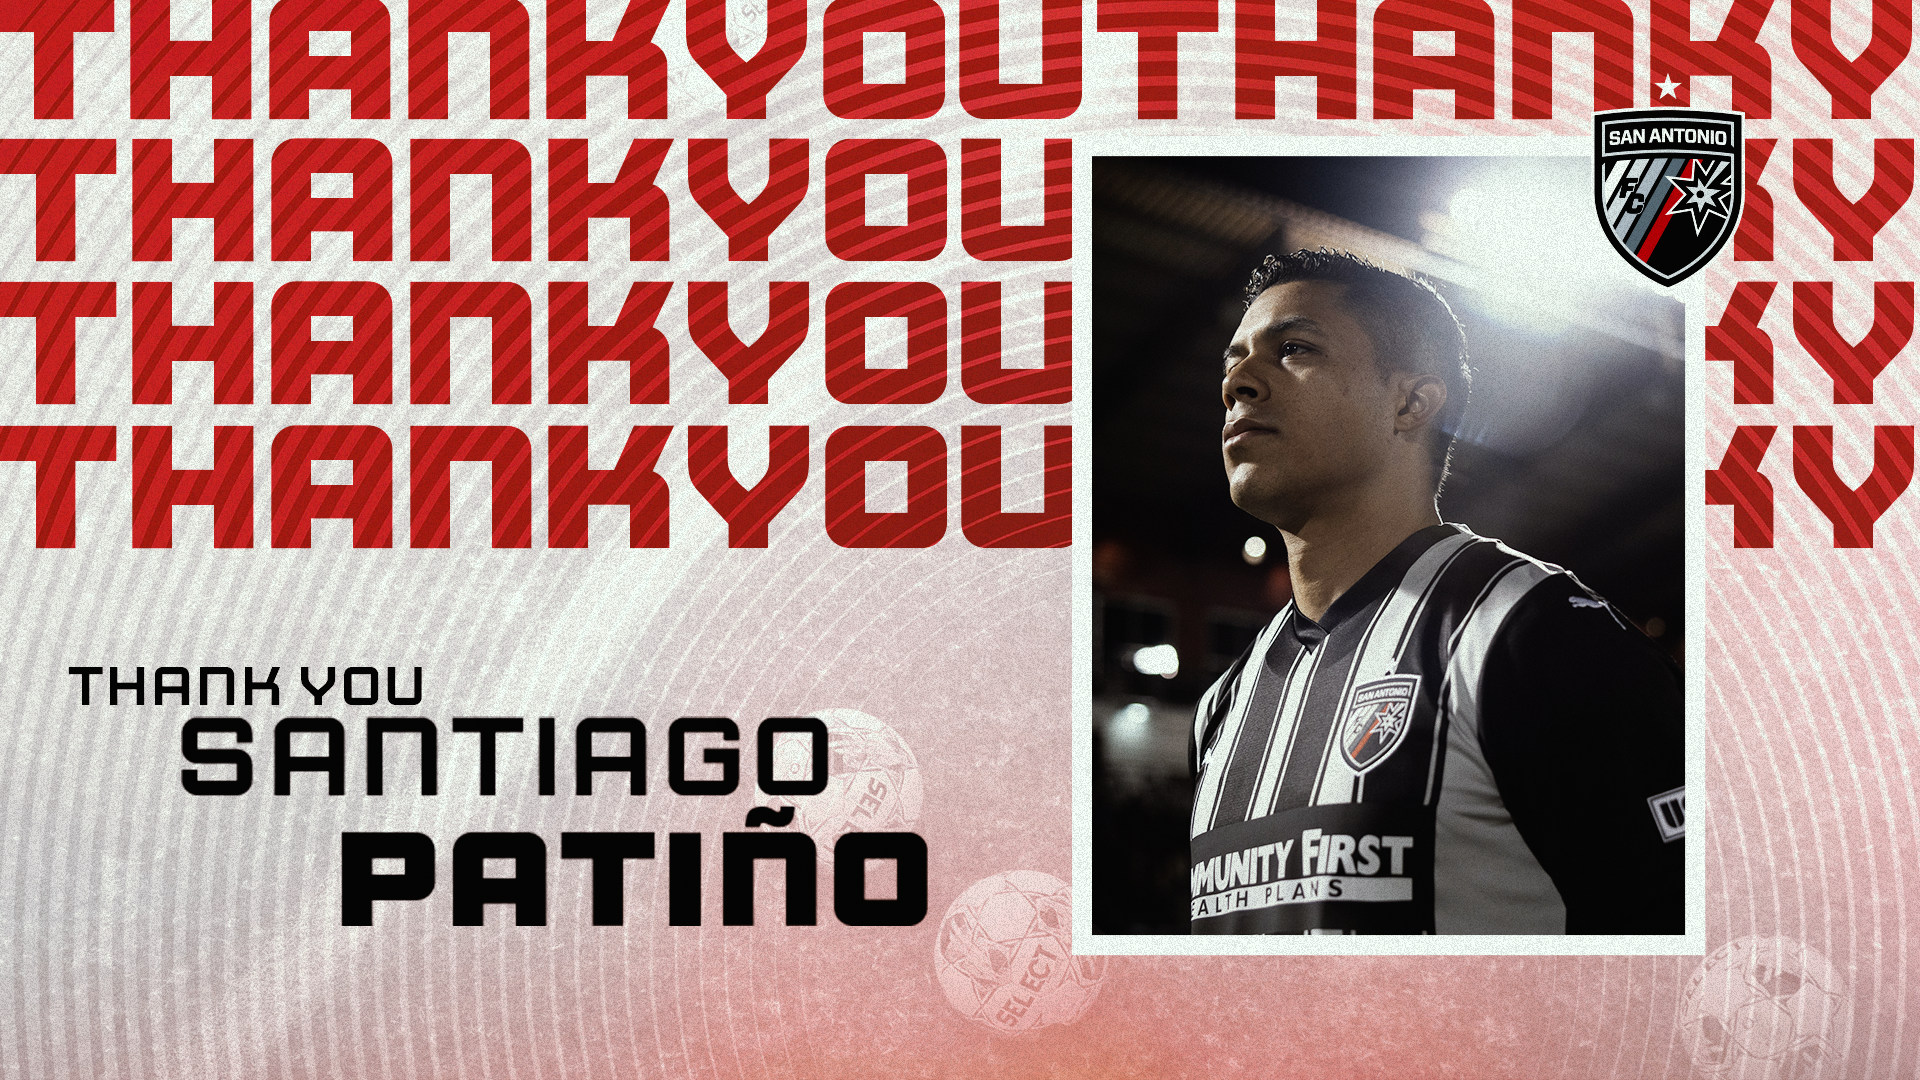 SAN ANTONIO FC TRANSFERS FORWARD SANTIAGO PATIÑO TO HO CHI MINH CITY FC FOR UNDISCLOSED FEE featured image